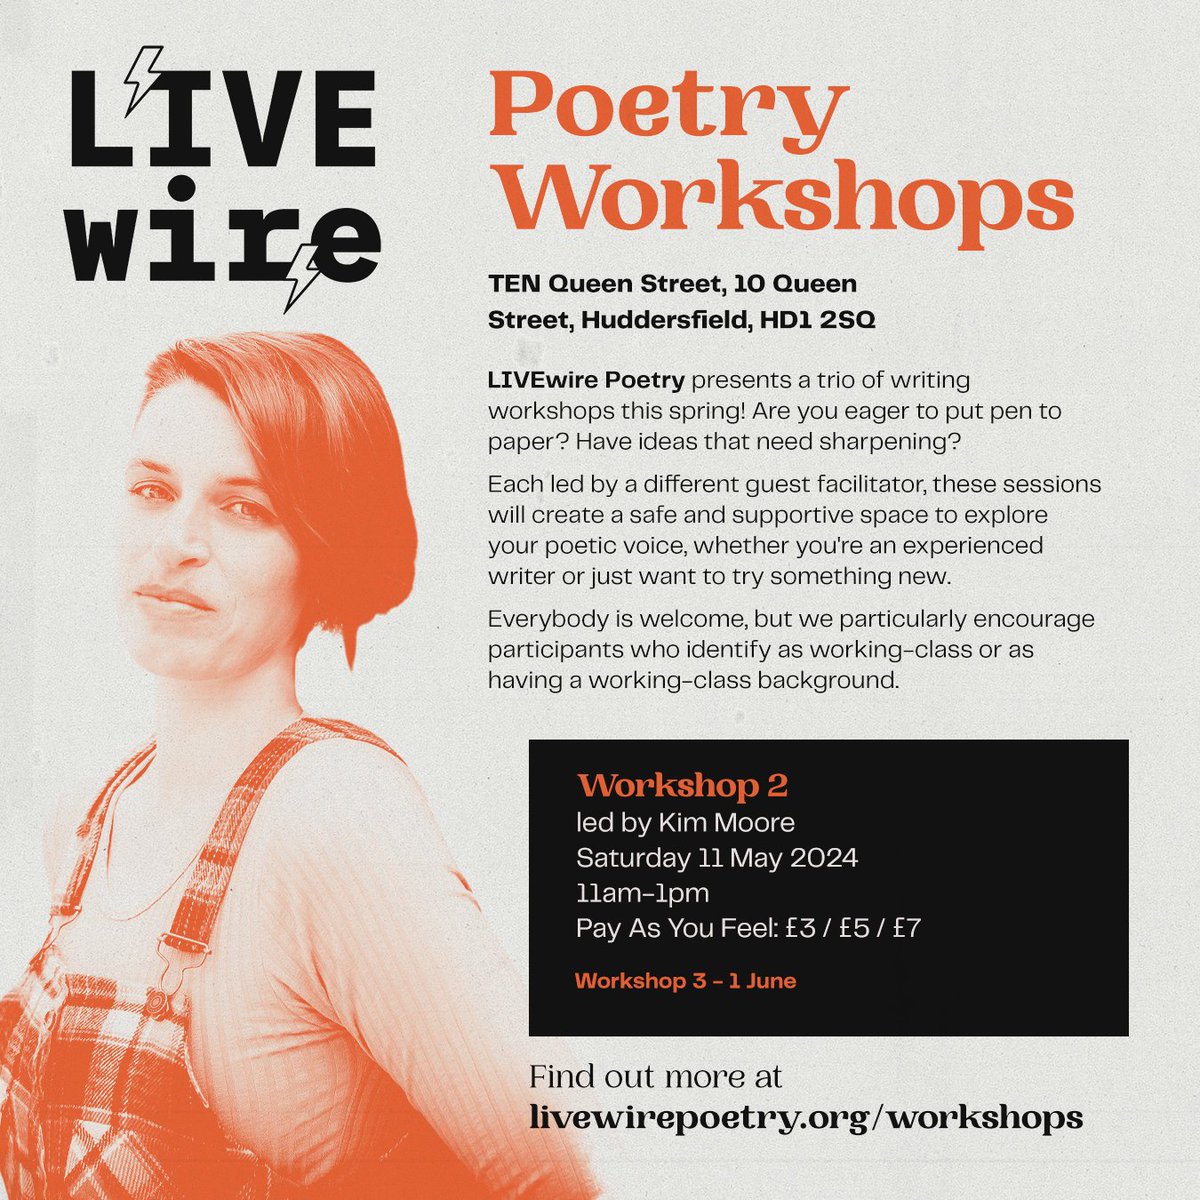 The second of our Huddersfield poetry workshops takes place on Sat 11 May, and will be led by @kimmoorepoet! As always, it's open to everybody ✍️ Tickets are Pay As You Feel (£3, £5, £7) and are available below: eventbrite.co.uk/e/poetry-writi…